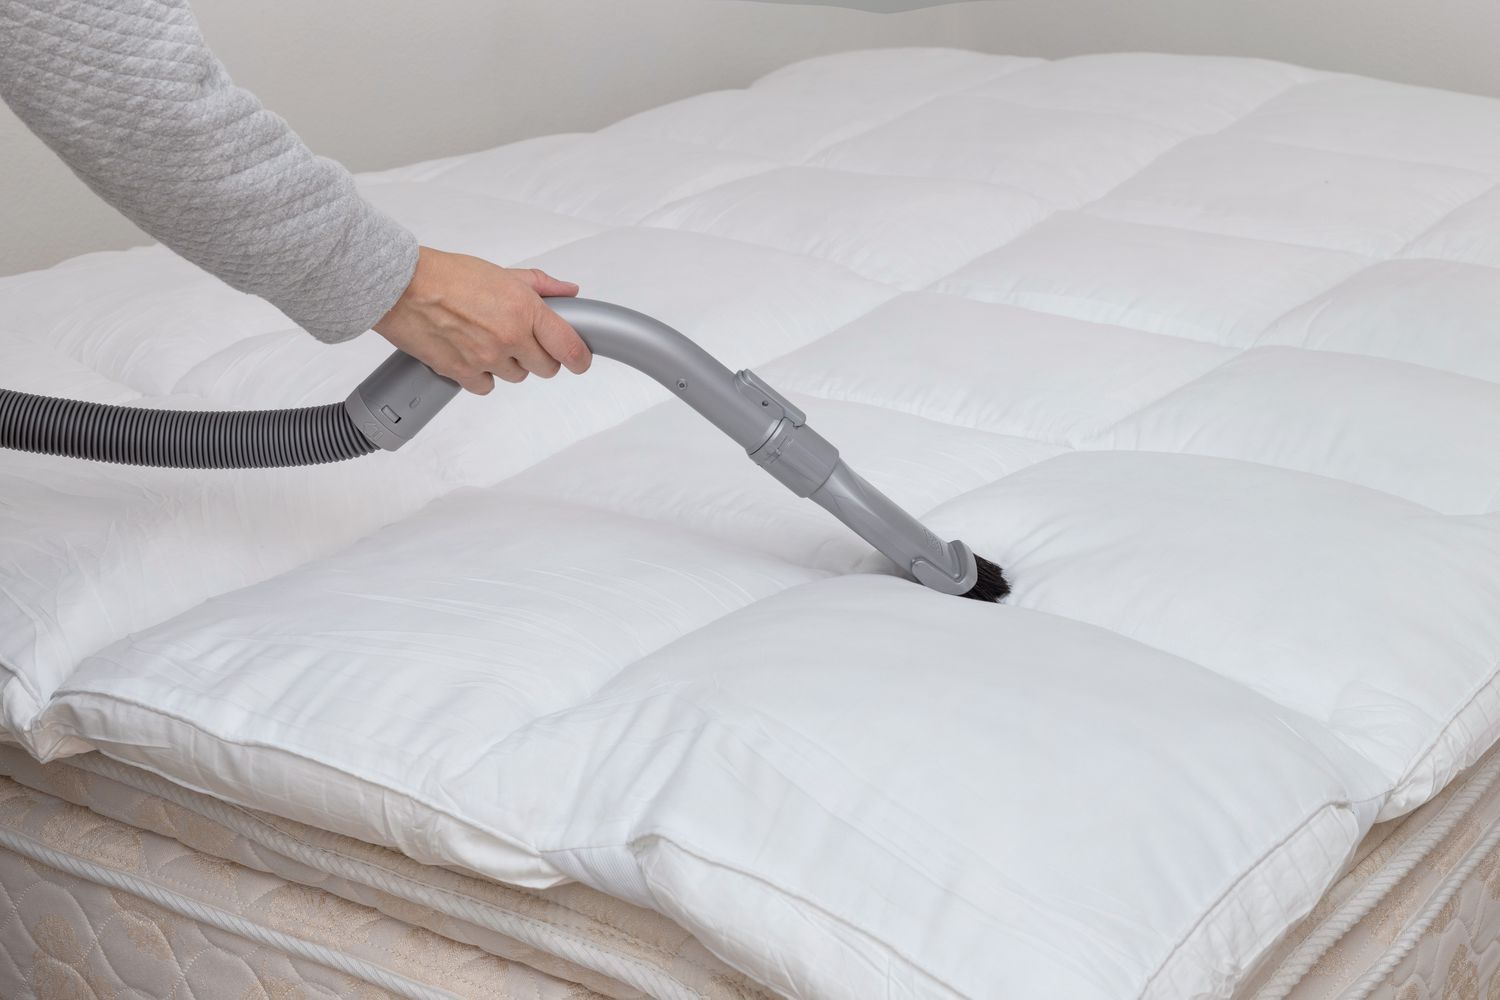 Mattress topper cleaned with vacuum hose and brush attachment